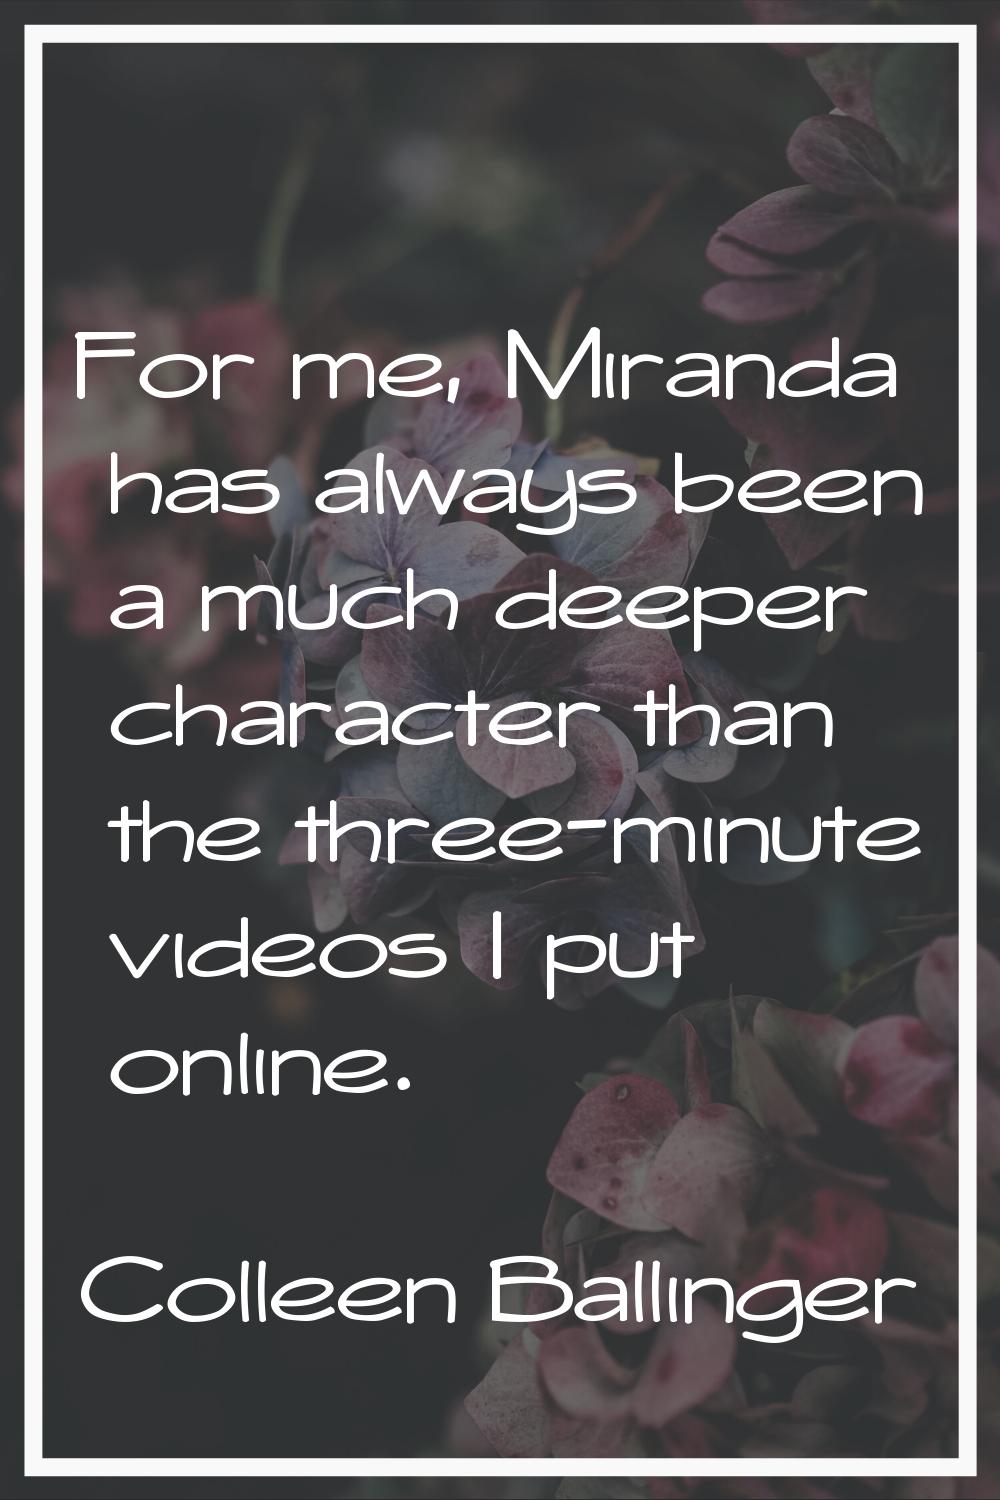 For me, Miranda has always been a much deeper character than the three-minute videos I put online.